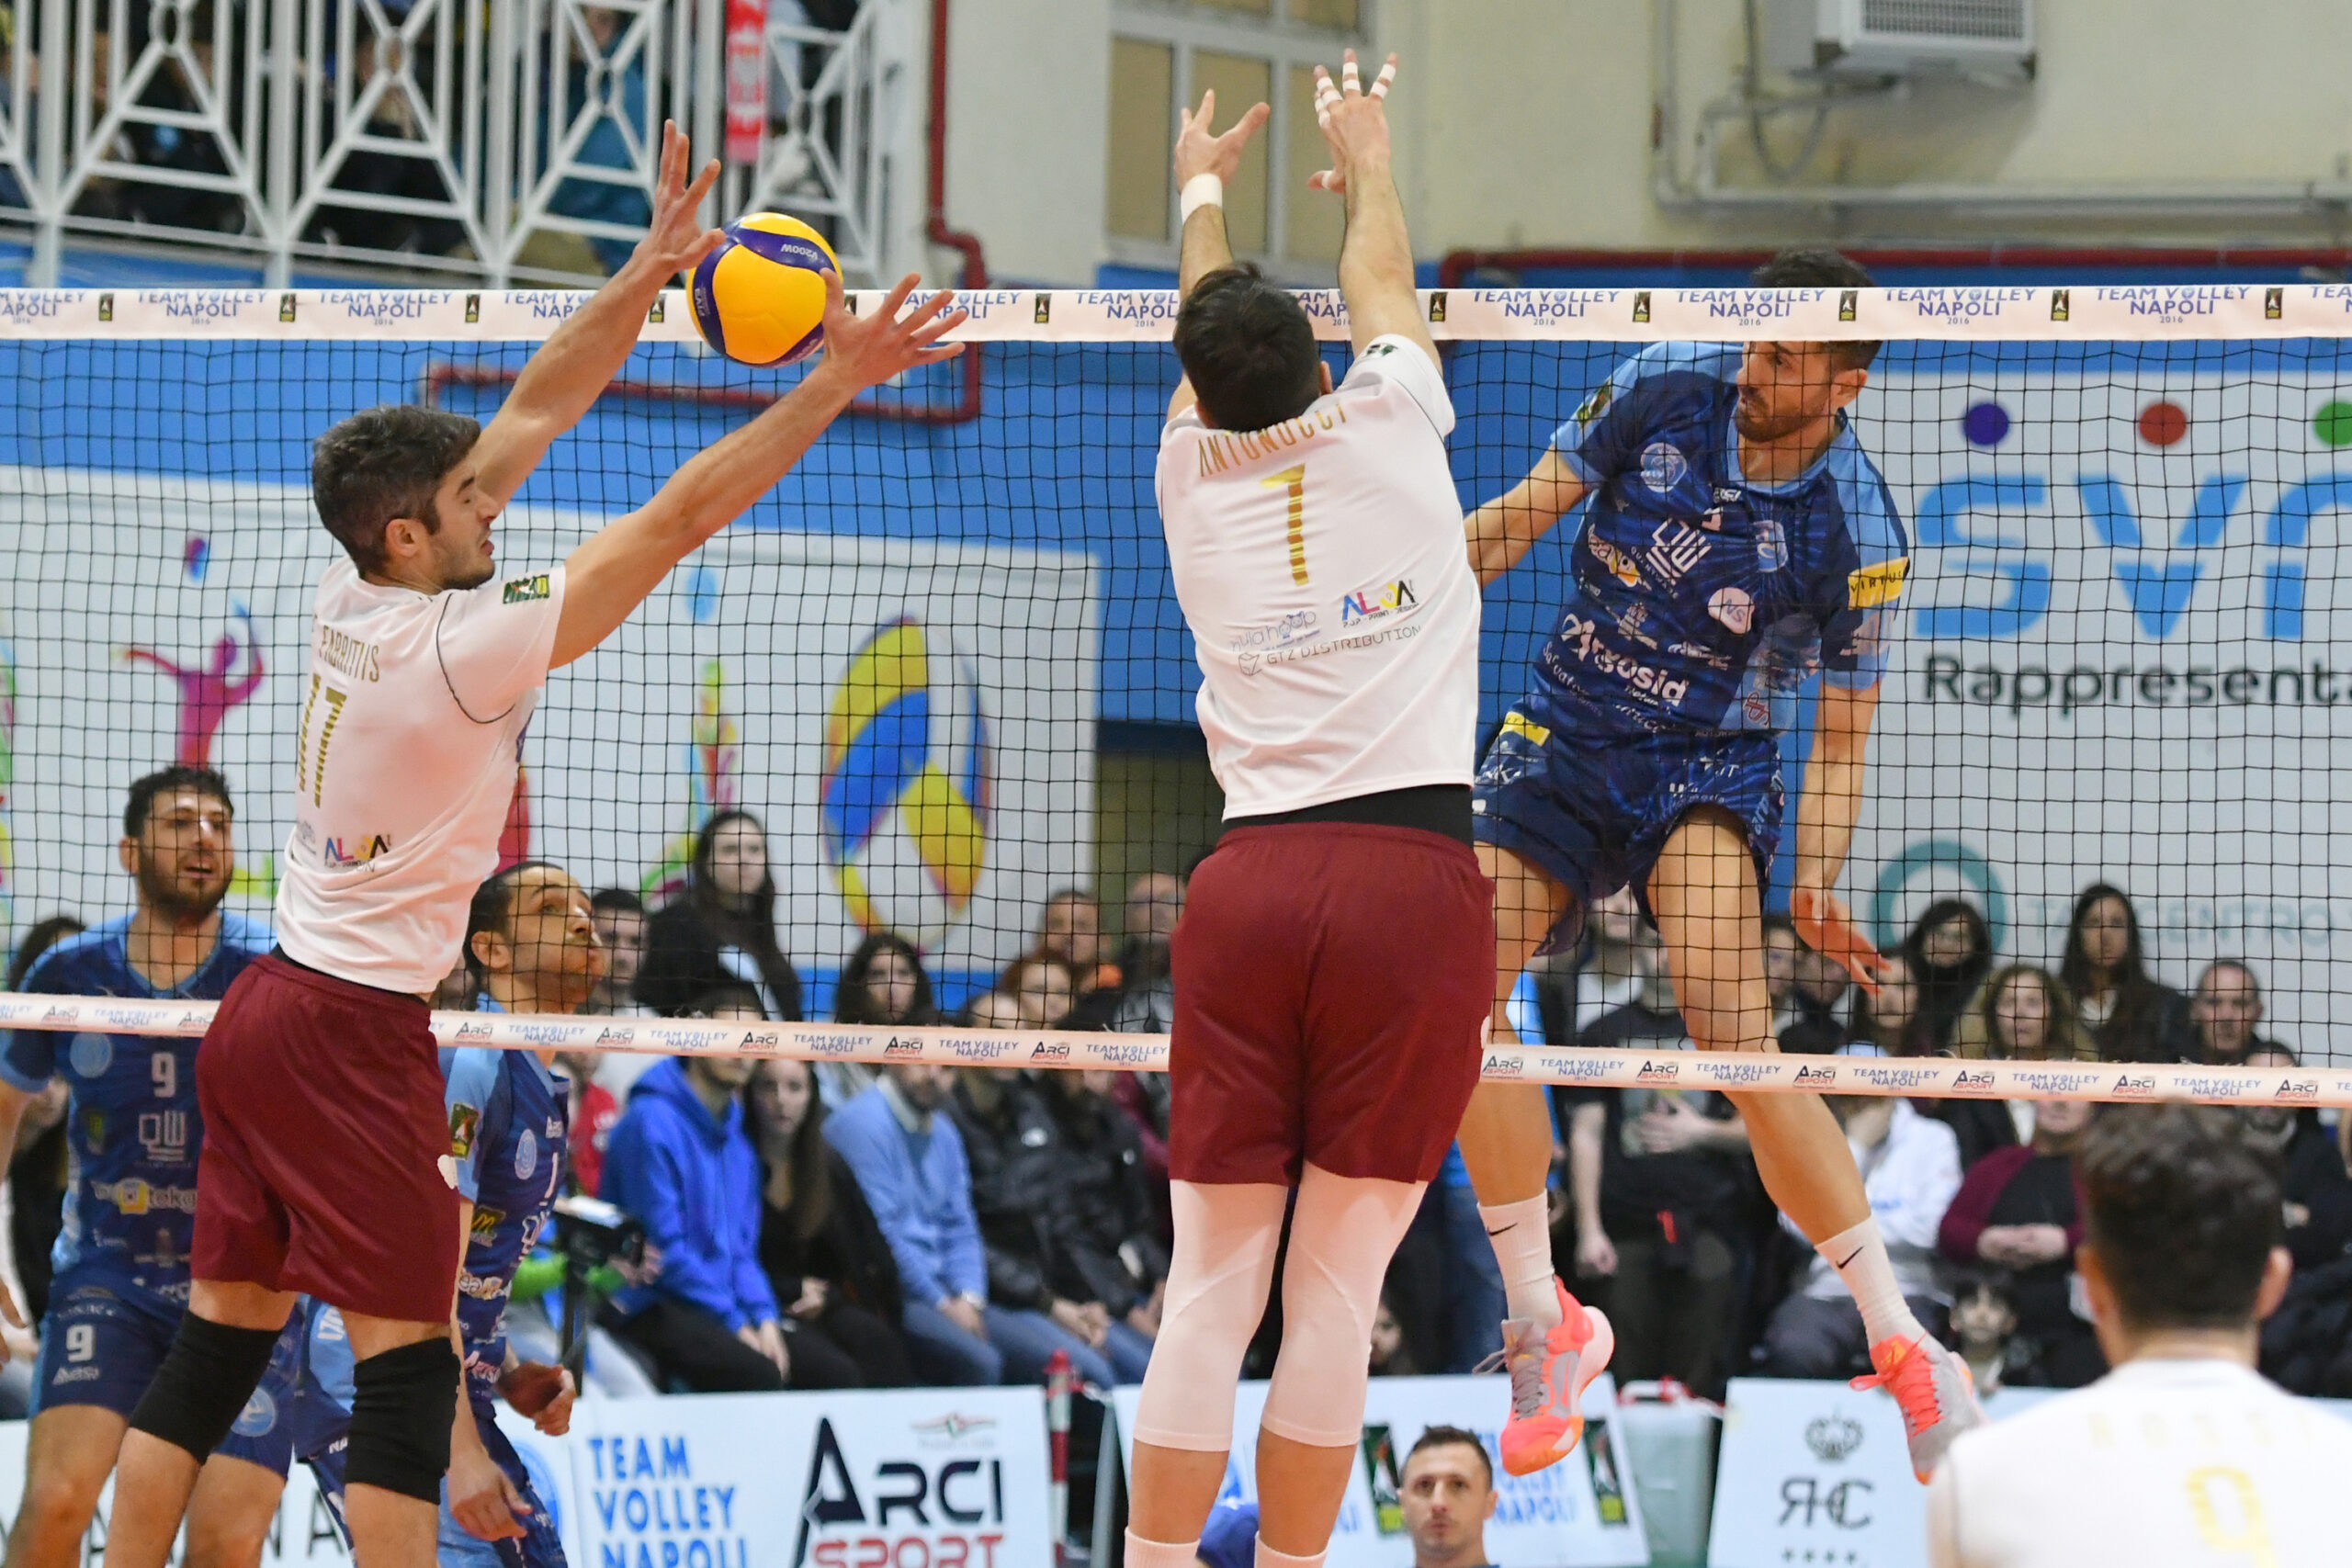 https://www.teamvolleynapoli.it/wp-content/uploads/2023/05/Napoli-Roma_208-scaled.jpg